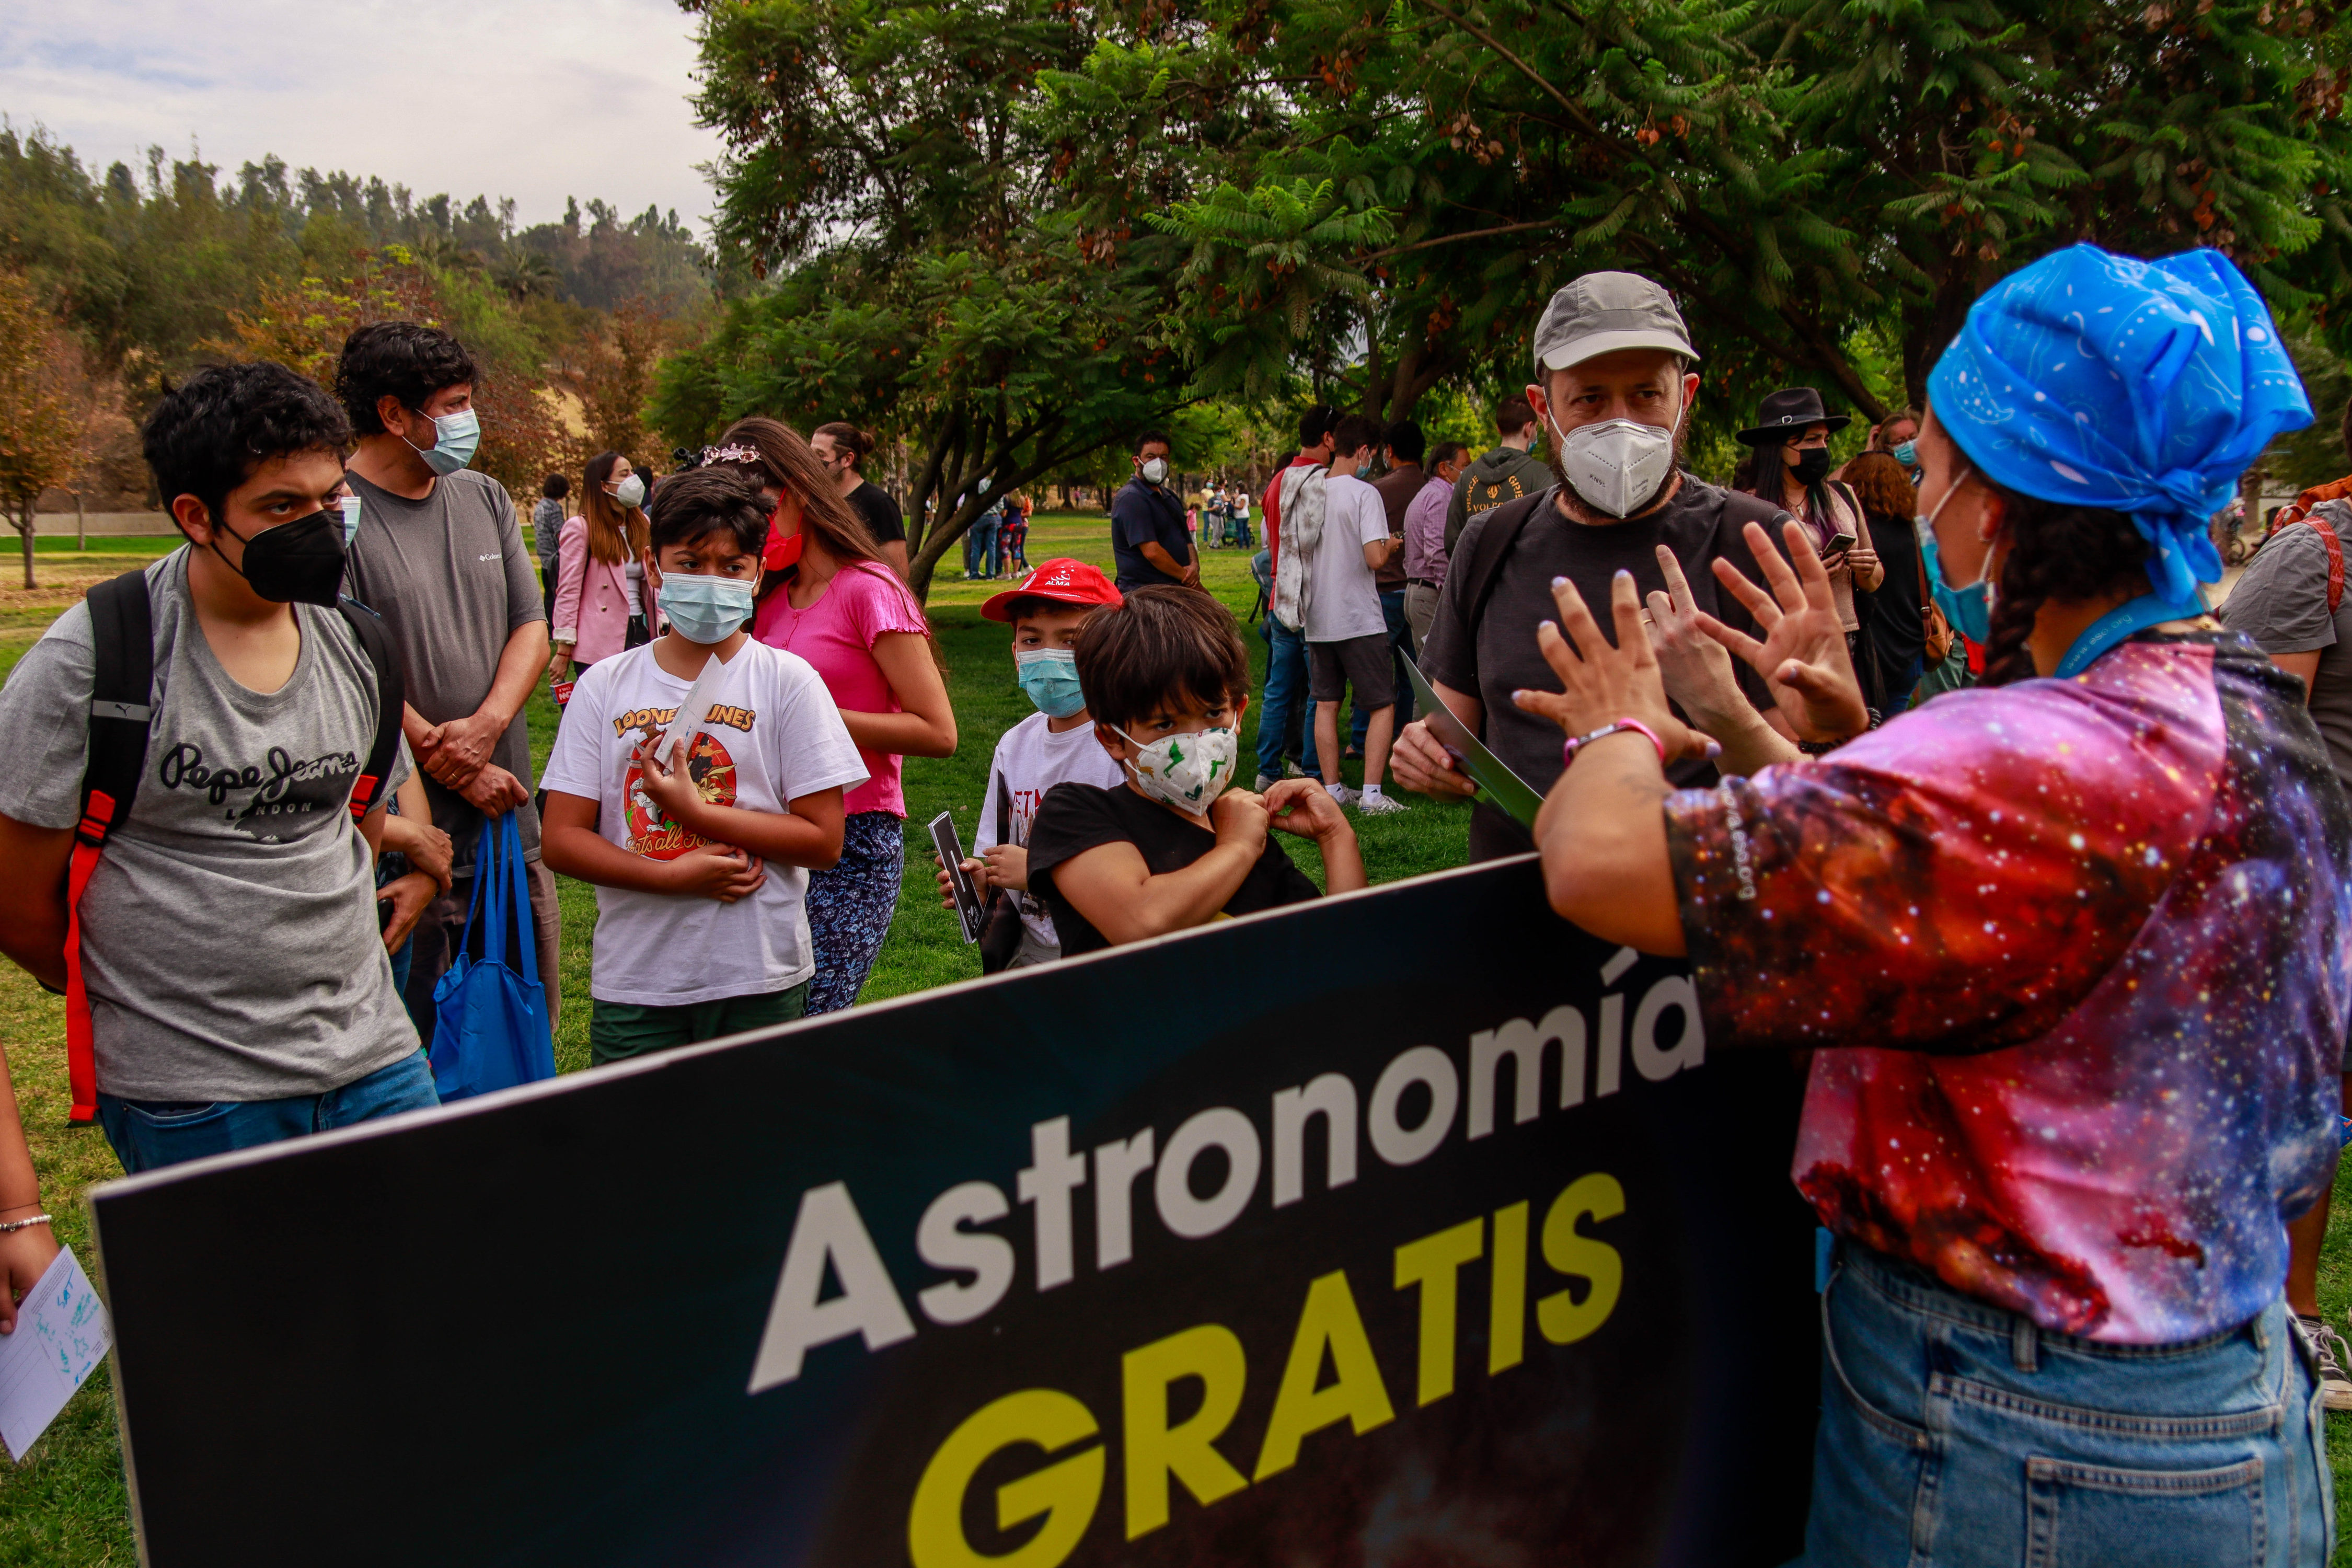 ¸After more than two years without holding face-to-face events due to the pandemic, the ALMA observatory together with its partners ESO, NRAO and NAOJ decided to meet the public last Saturday, March 19, this time at the Bicentennial Park in Vitacura, to celebrate Astronomy Day in Chile.